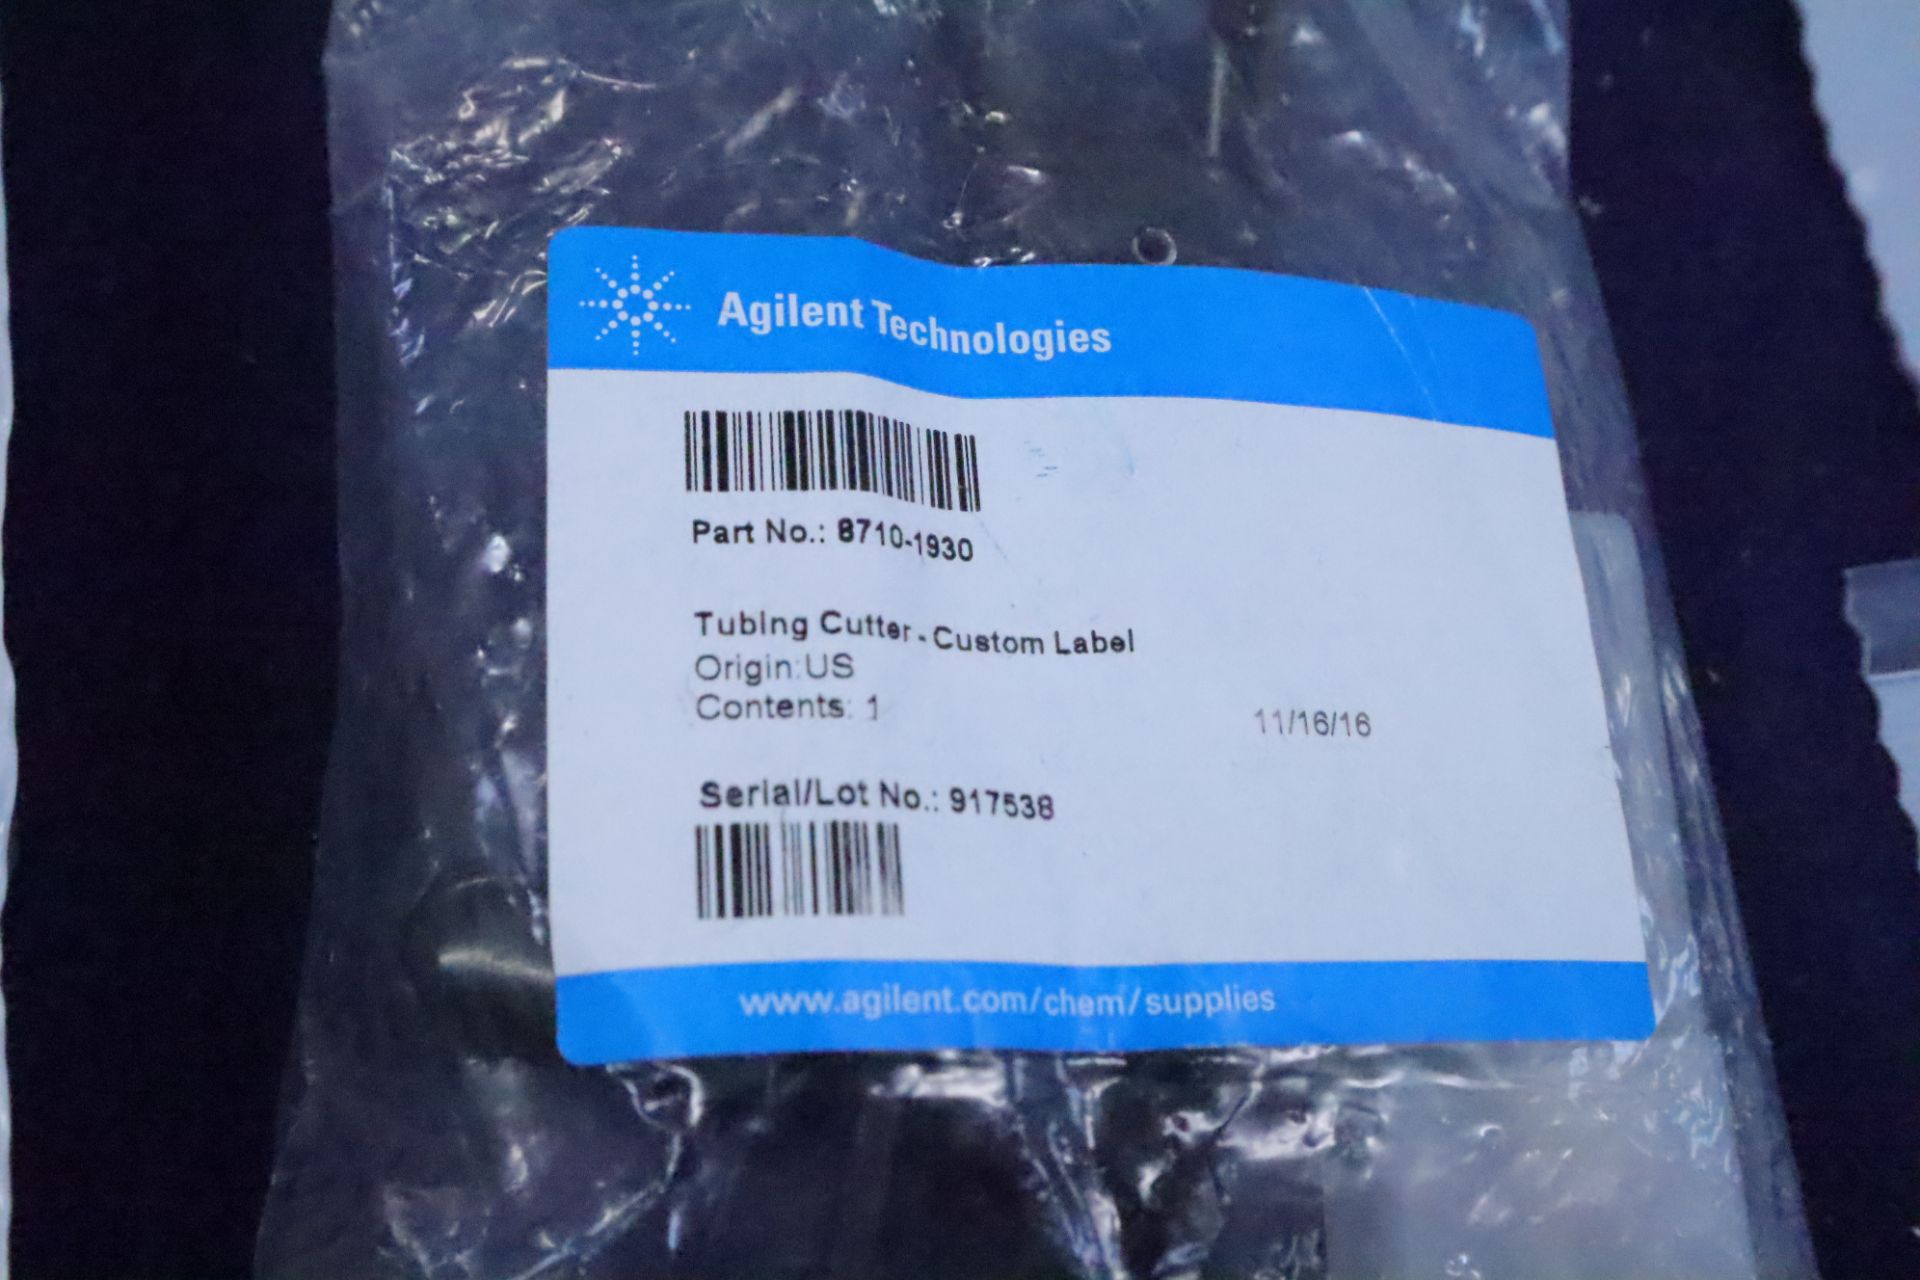 UPDATED PHOTOS Agilent Technologies OEM Replacement Parts and tool kits for LC/MS Machines - Image 14 of 37